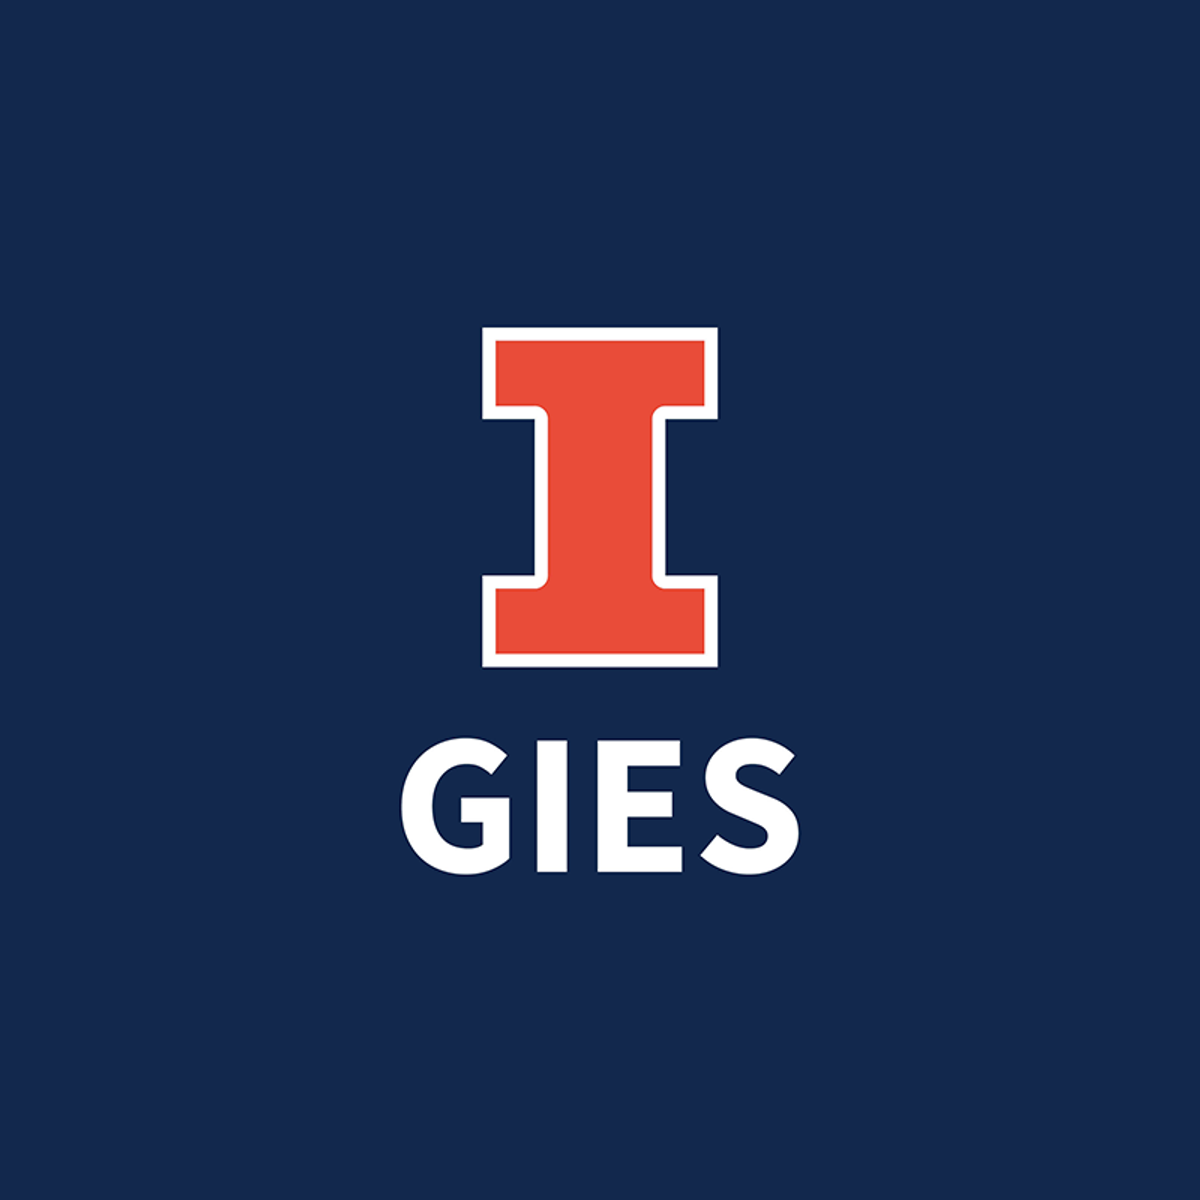 Reviewing Illinois' course: Marketing in a Digital World — Class Central